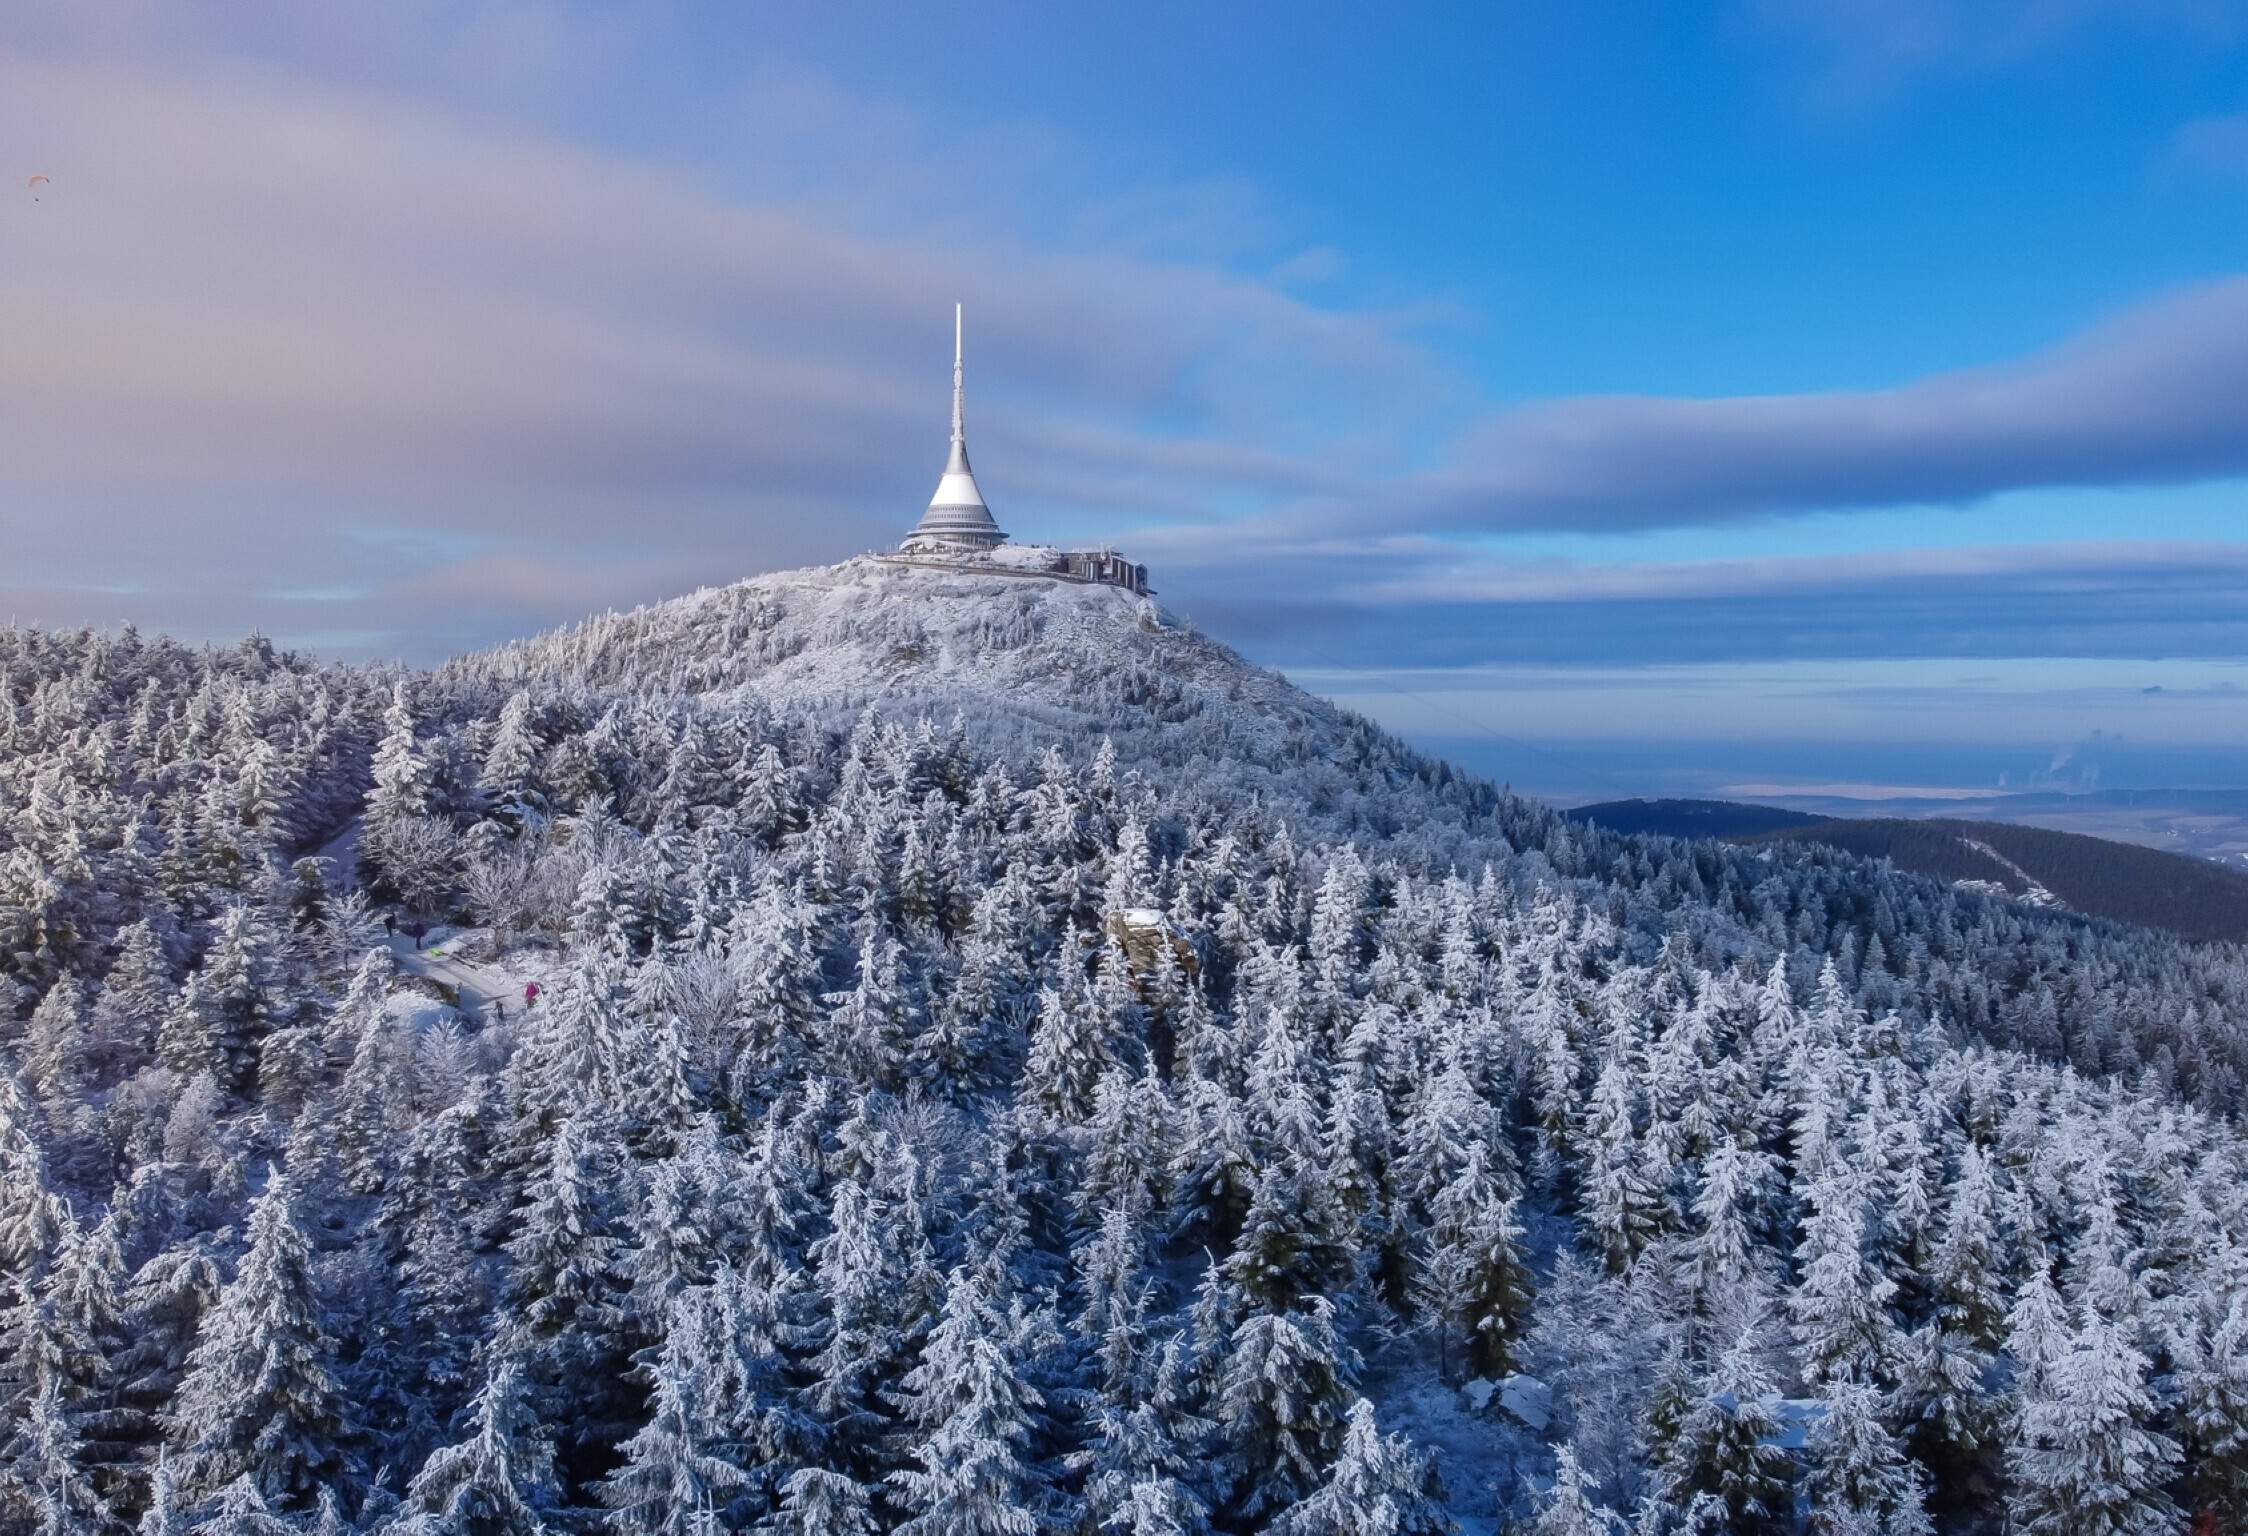 Snow-covered cypress trees surround the tower on the mountaintop.